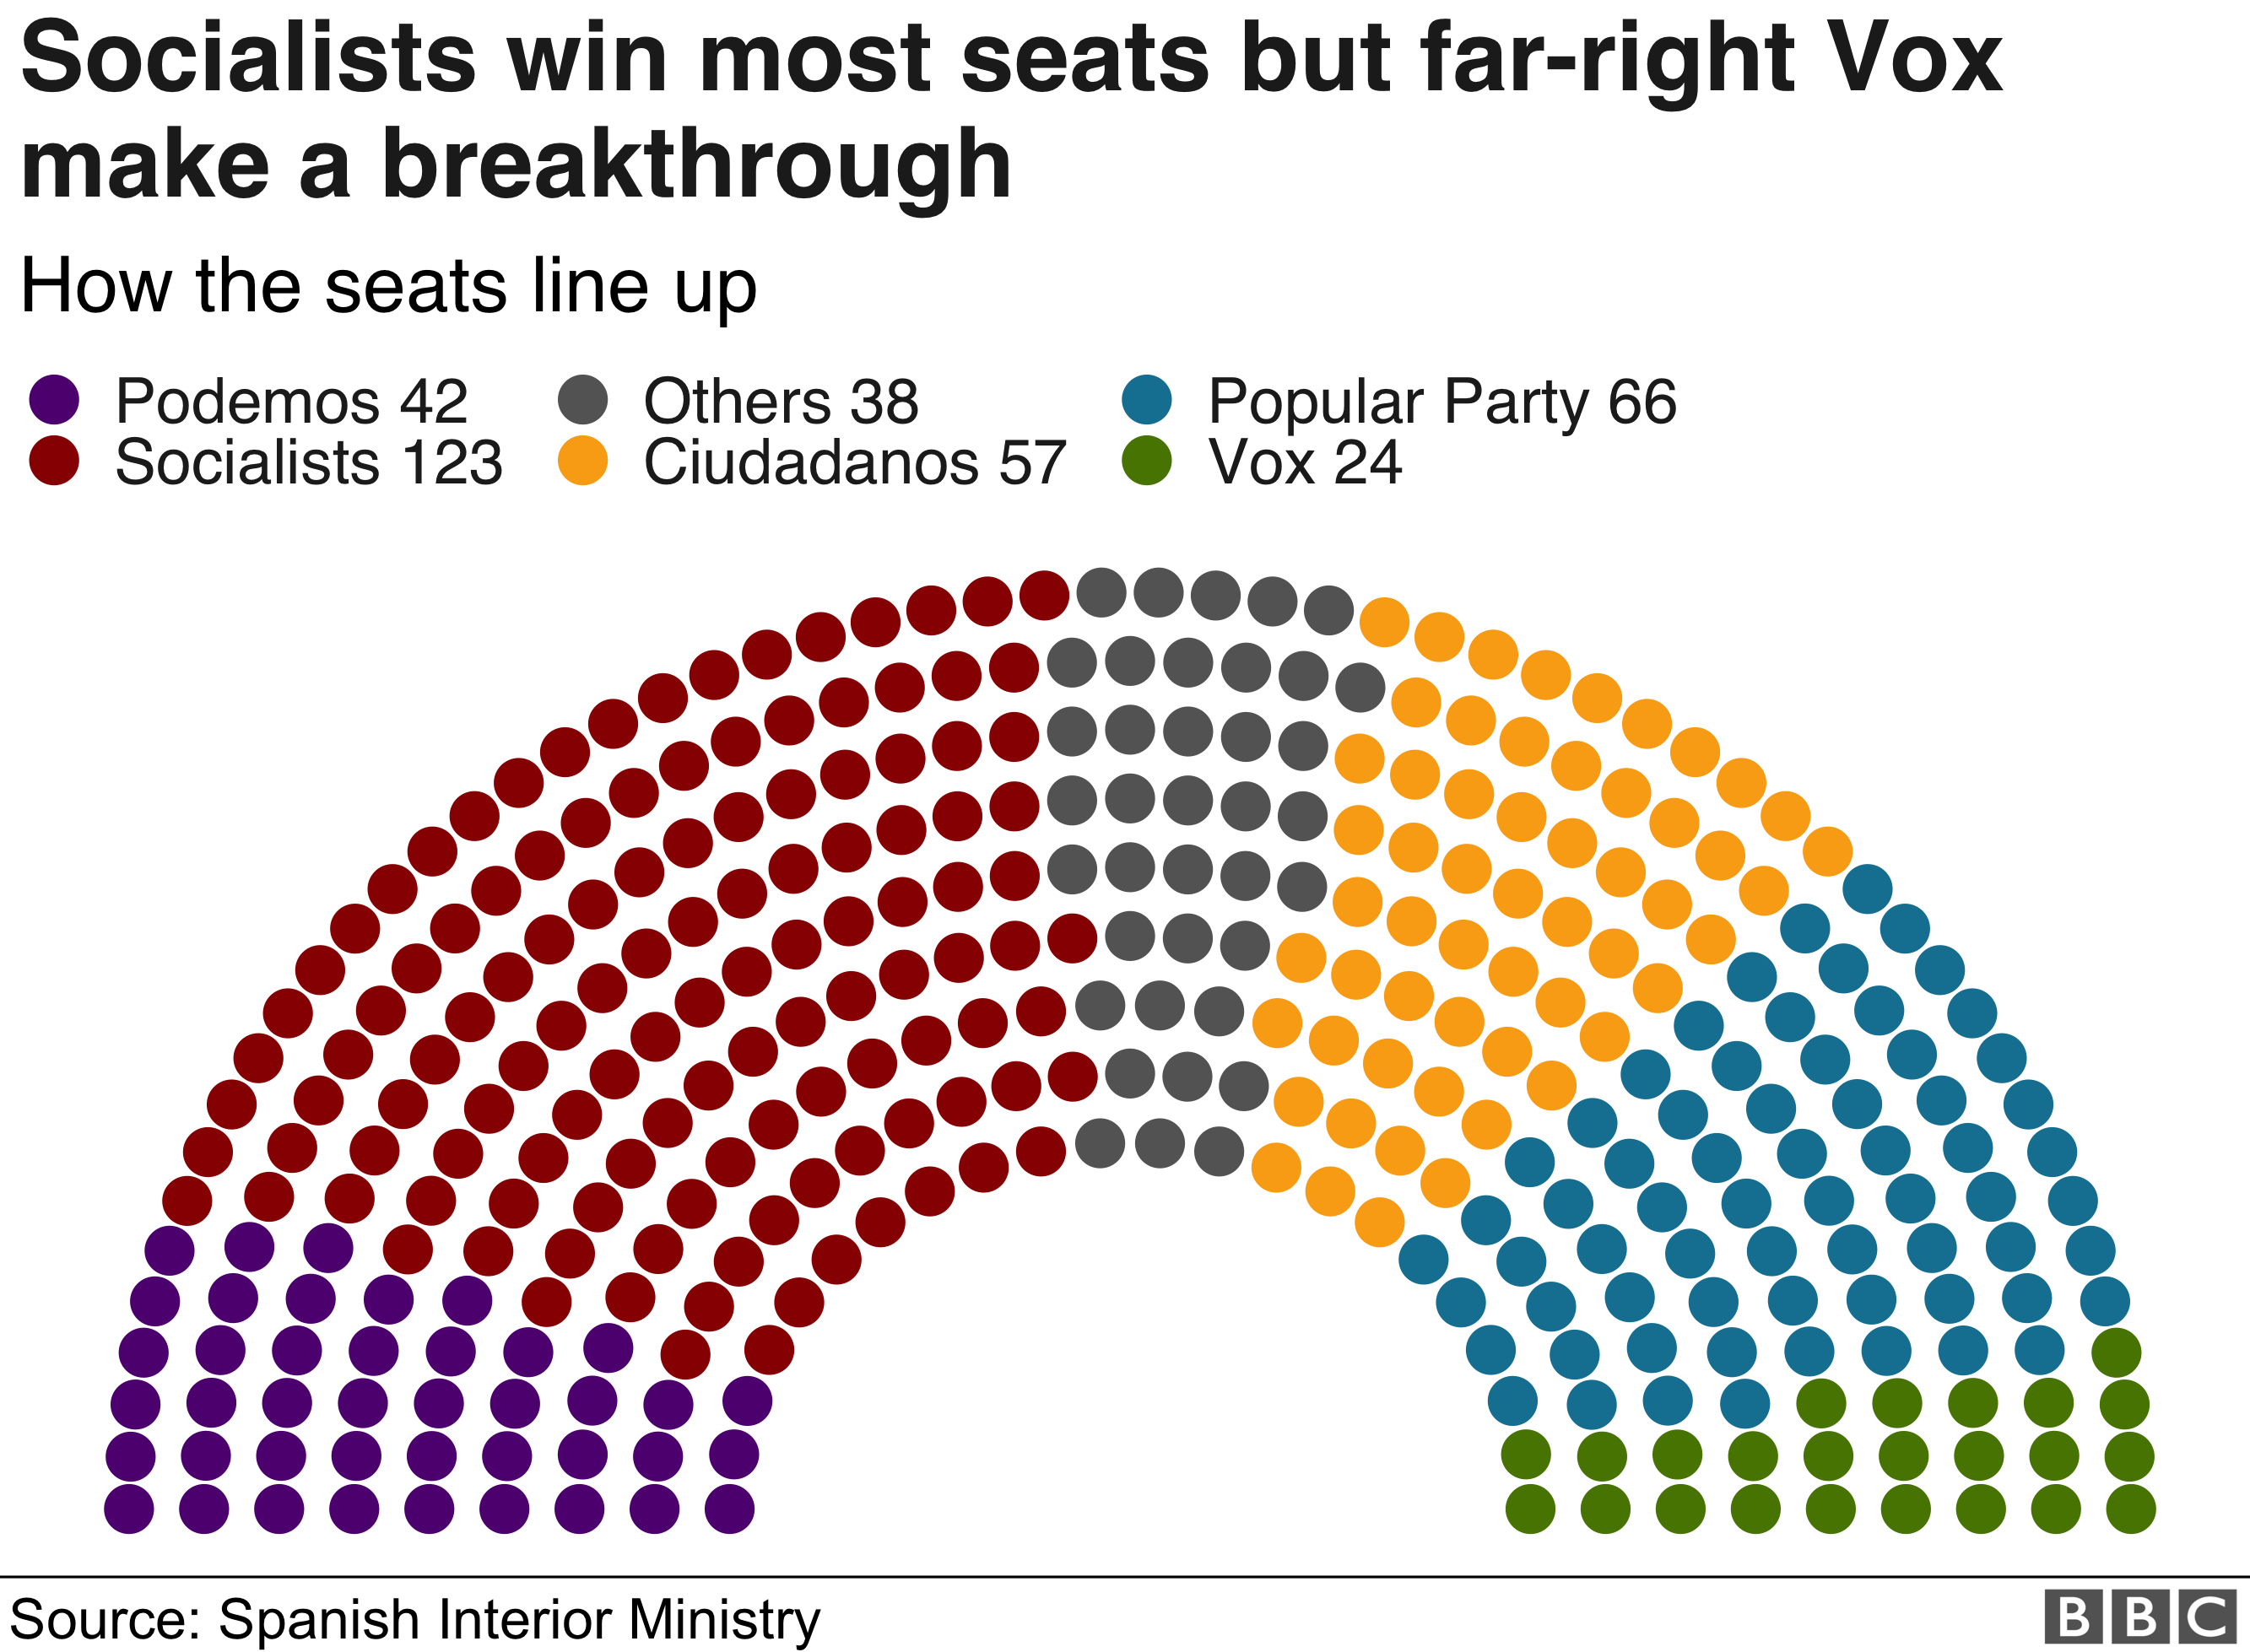 A graphic shows the number of seats won in parliament in a colour-coded hemicycle format: Socialists 123, Popular Party 66, Ciudadanos 57, Podemos 42, Vox 24, Others 38